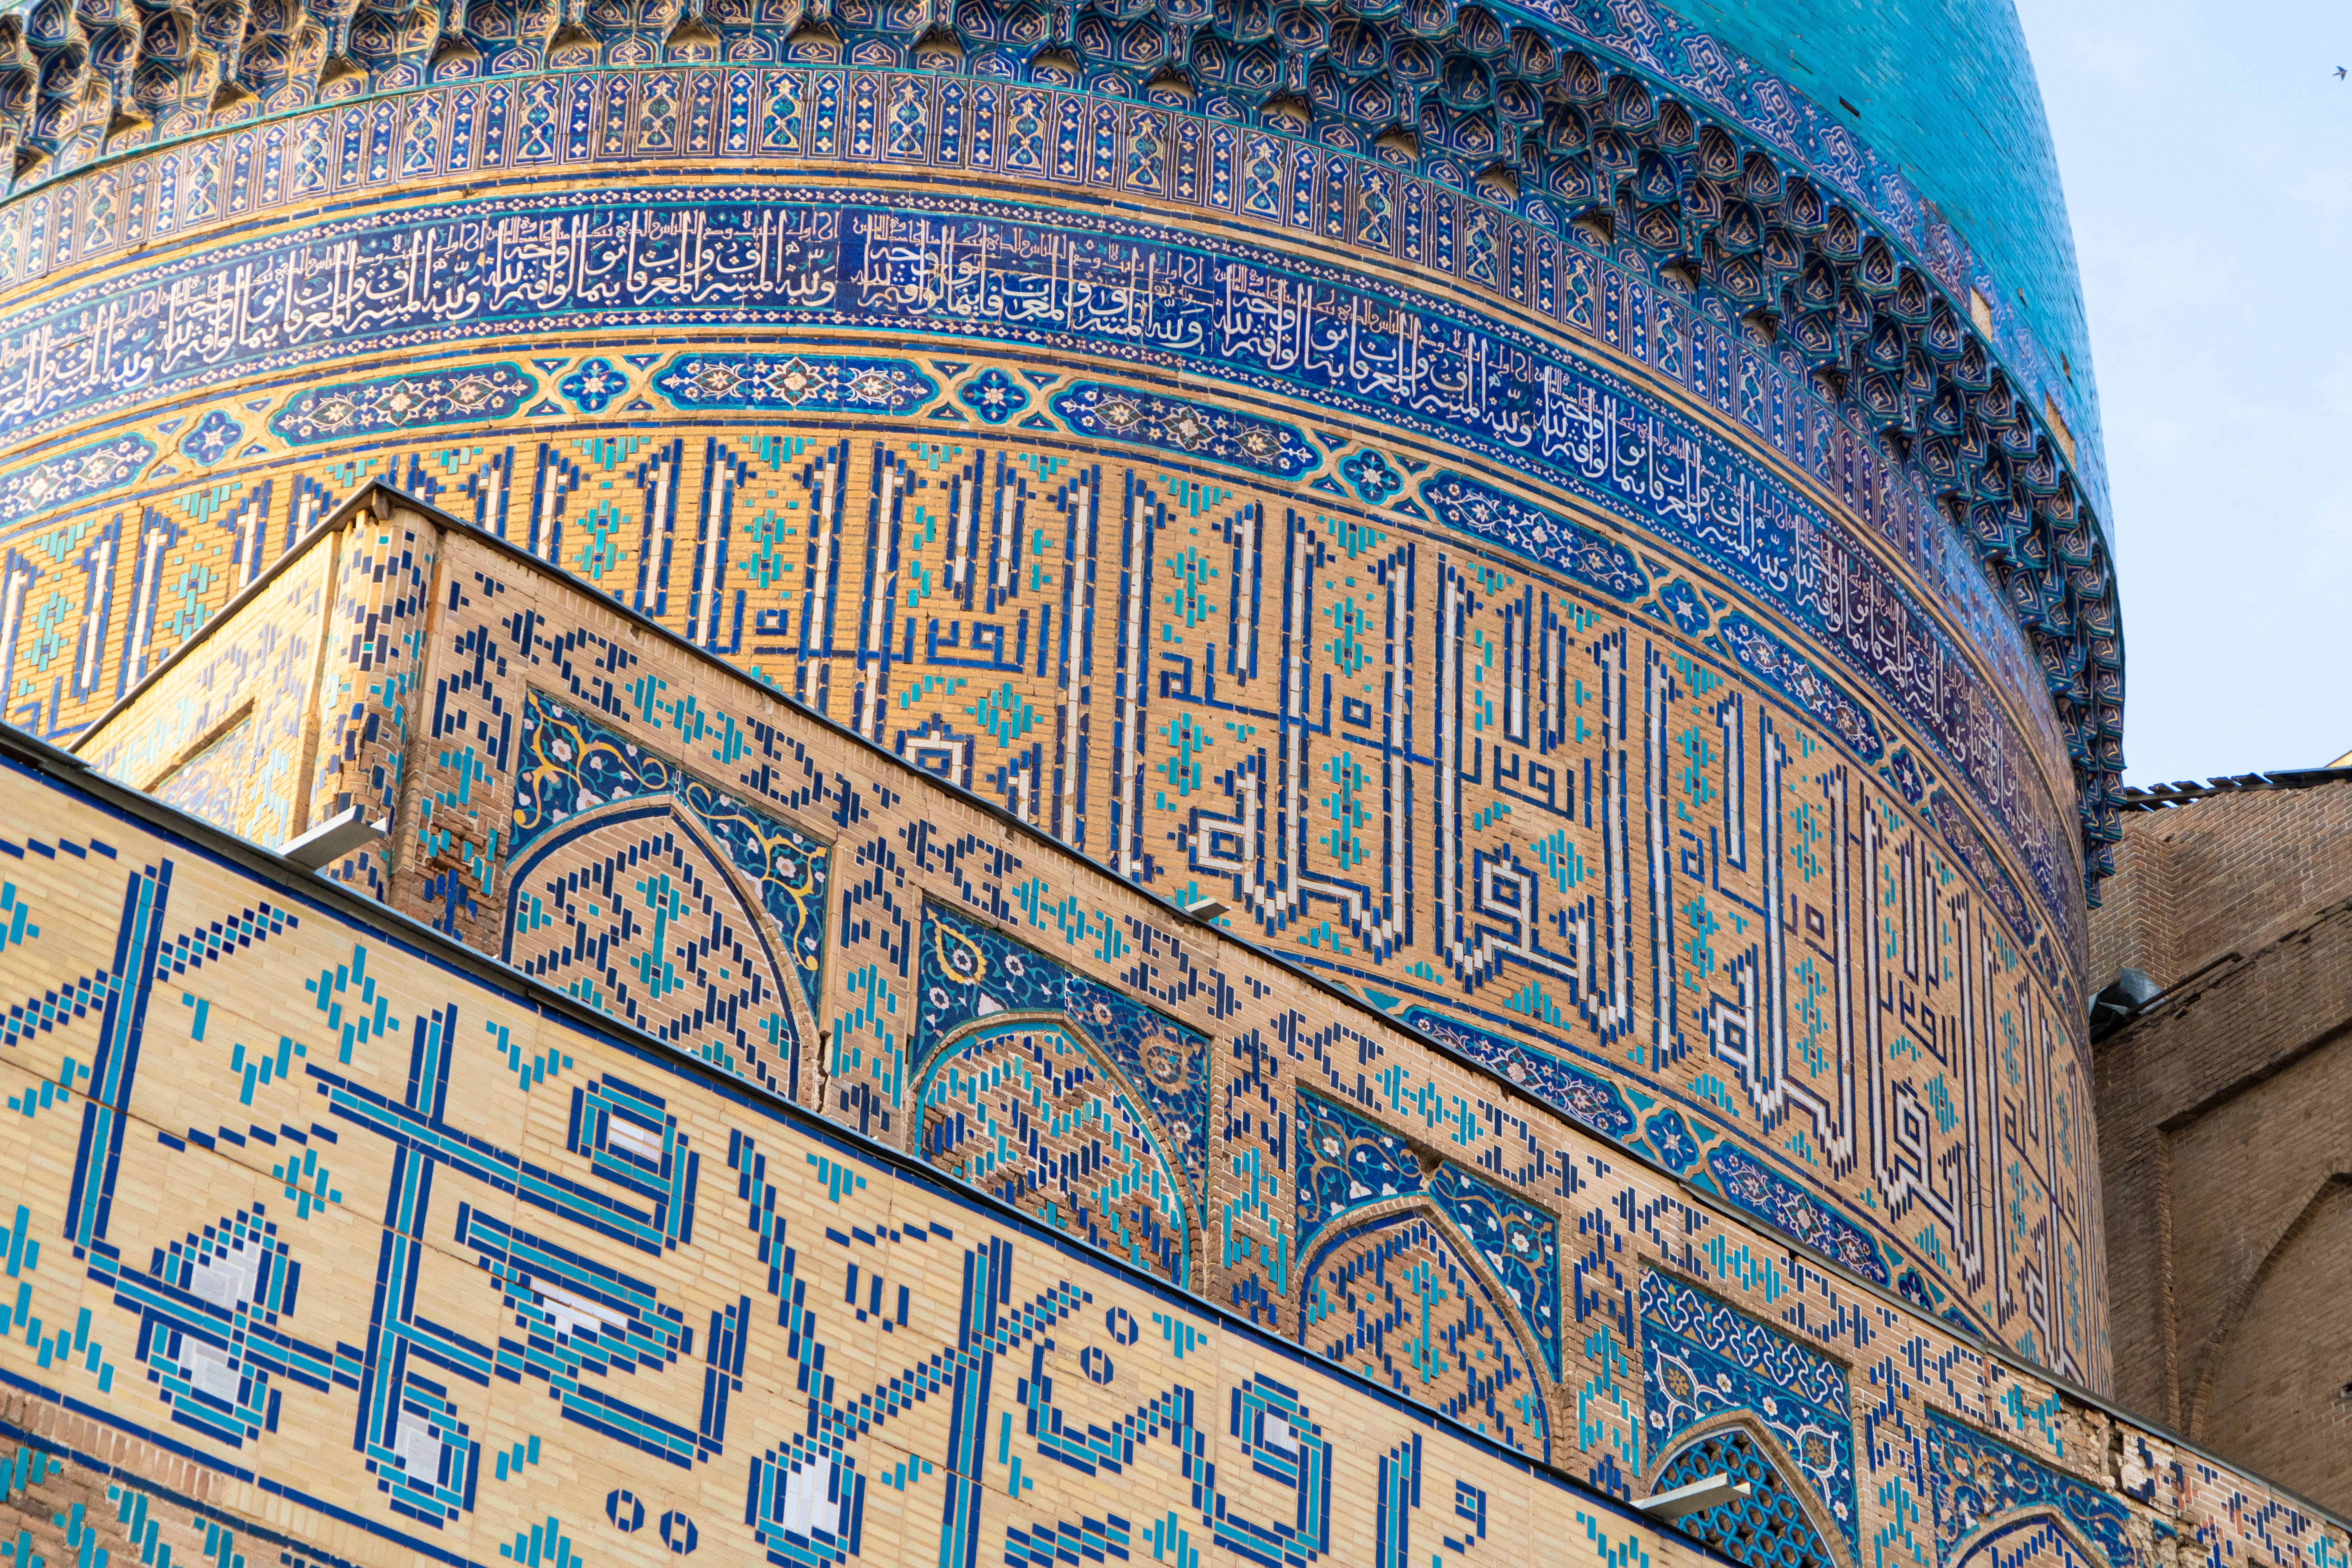 Closeup shot of Islamic patterns and calligraphy on a dome in Samarkand – © Yernar Almabek / Shutterstock